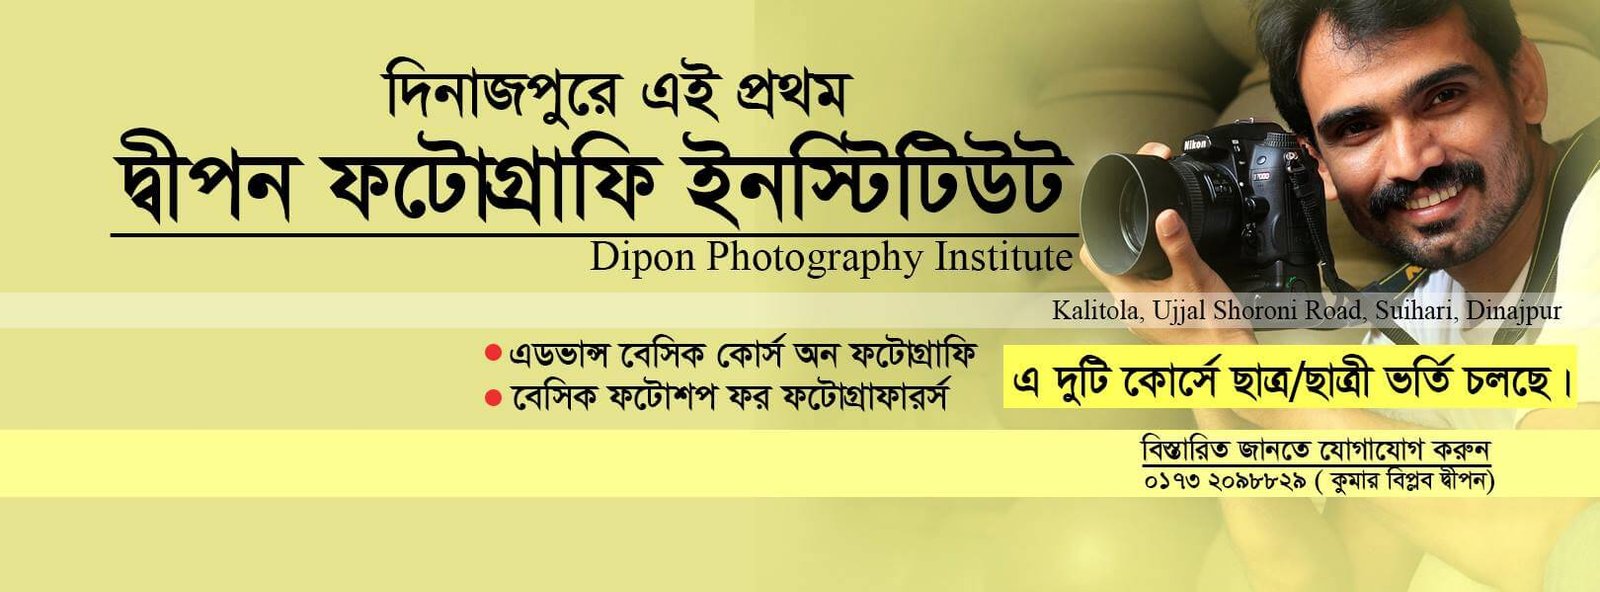 Dipon Photography Institute